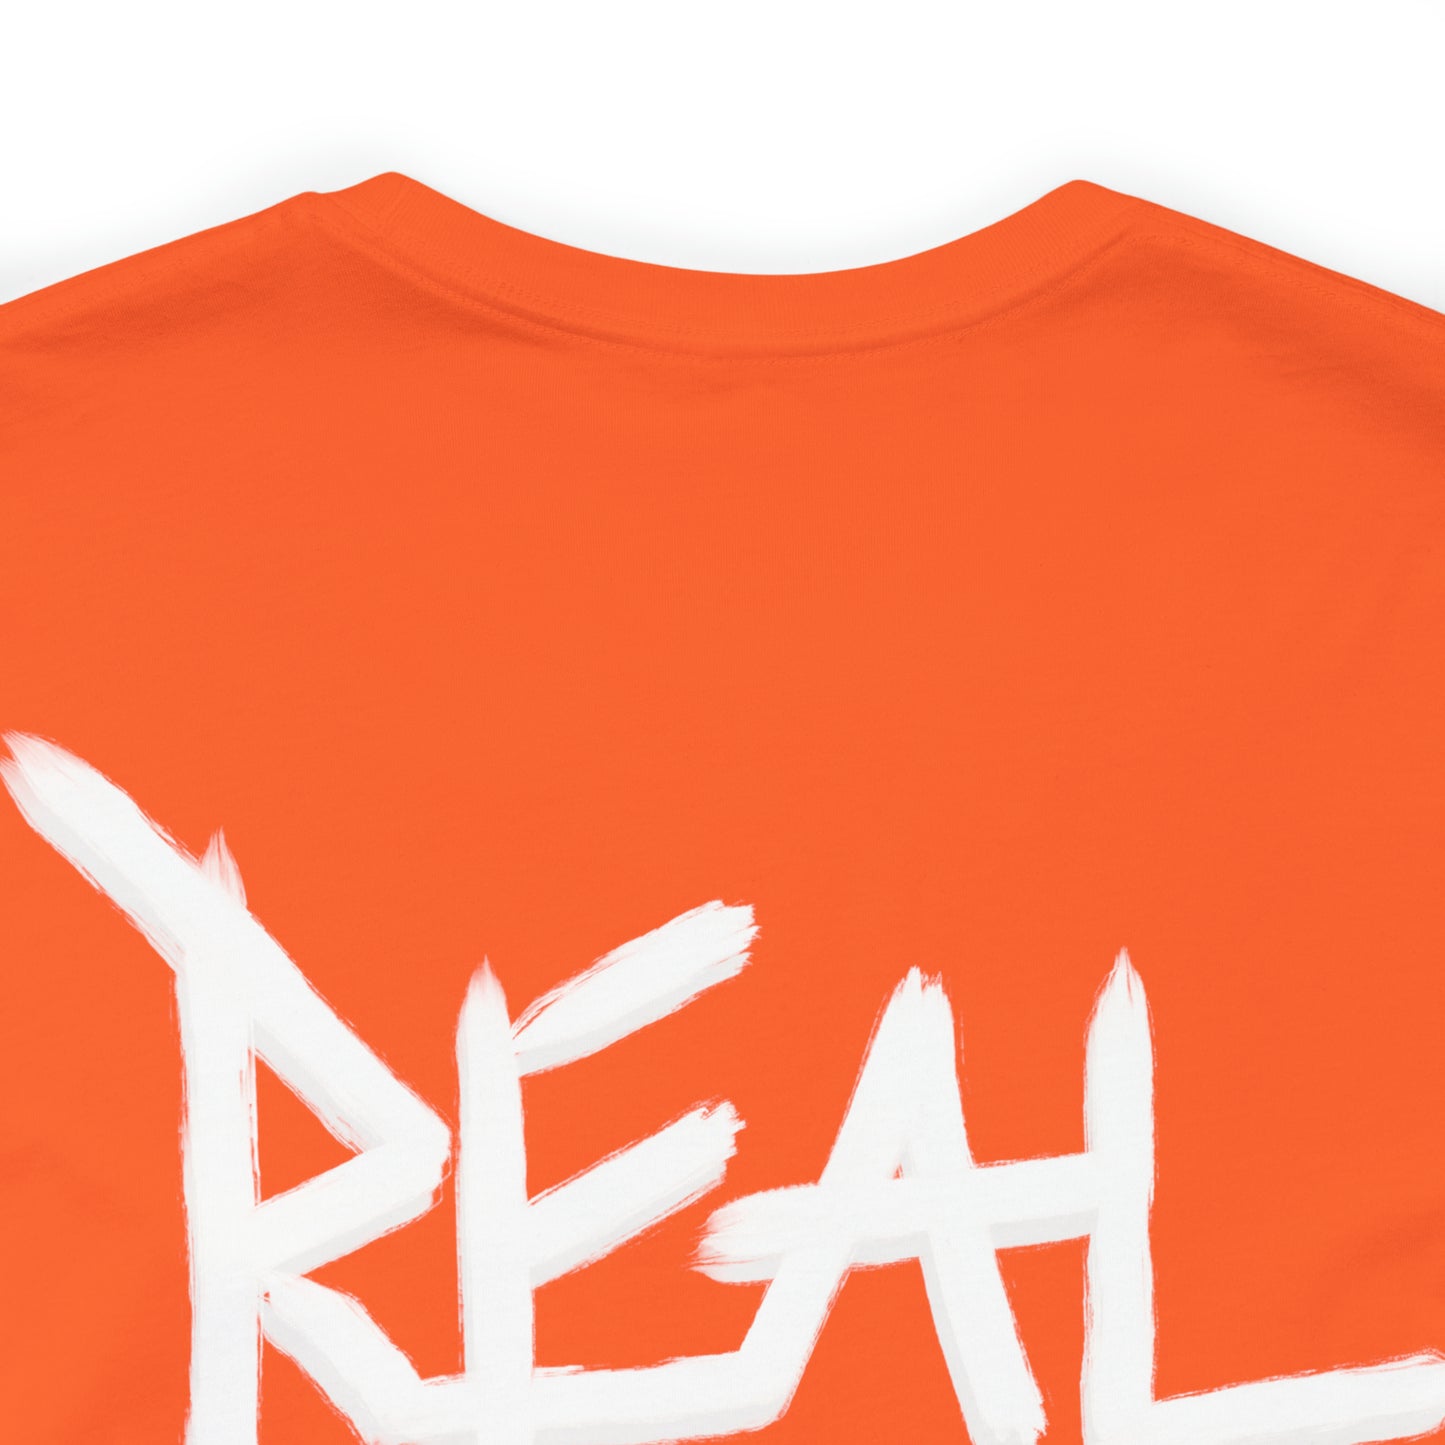 Makhi Connor: Real Deal Stepper Tee